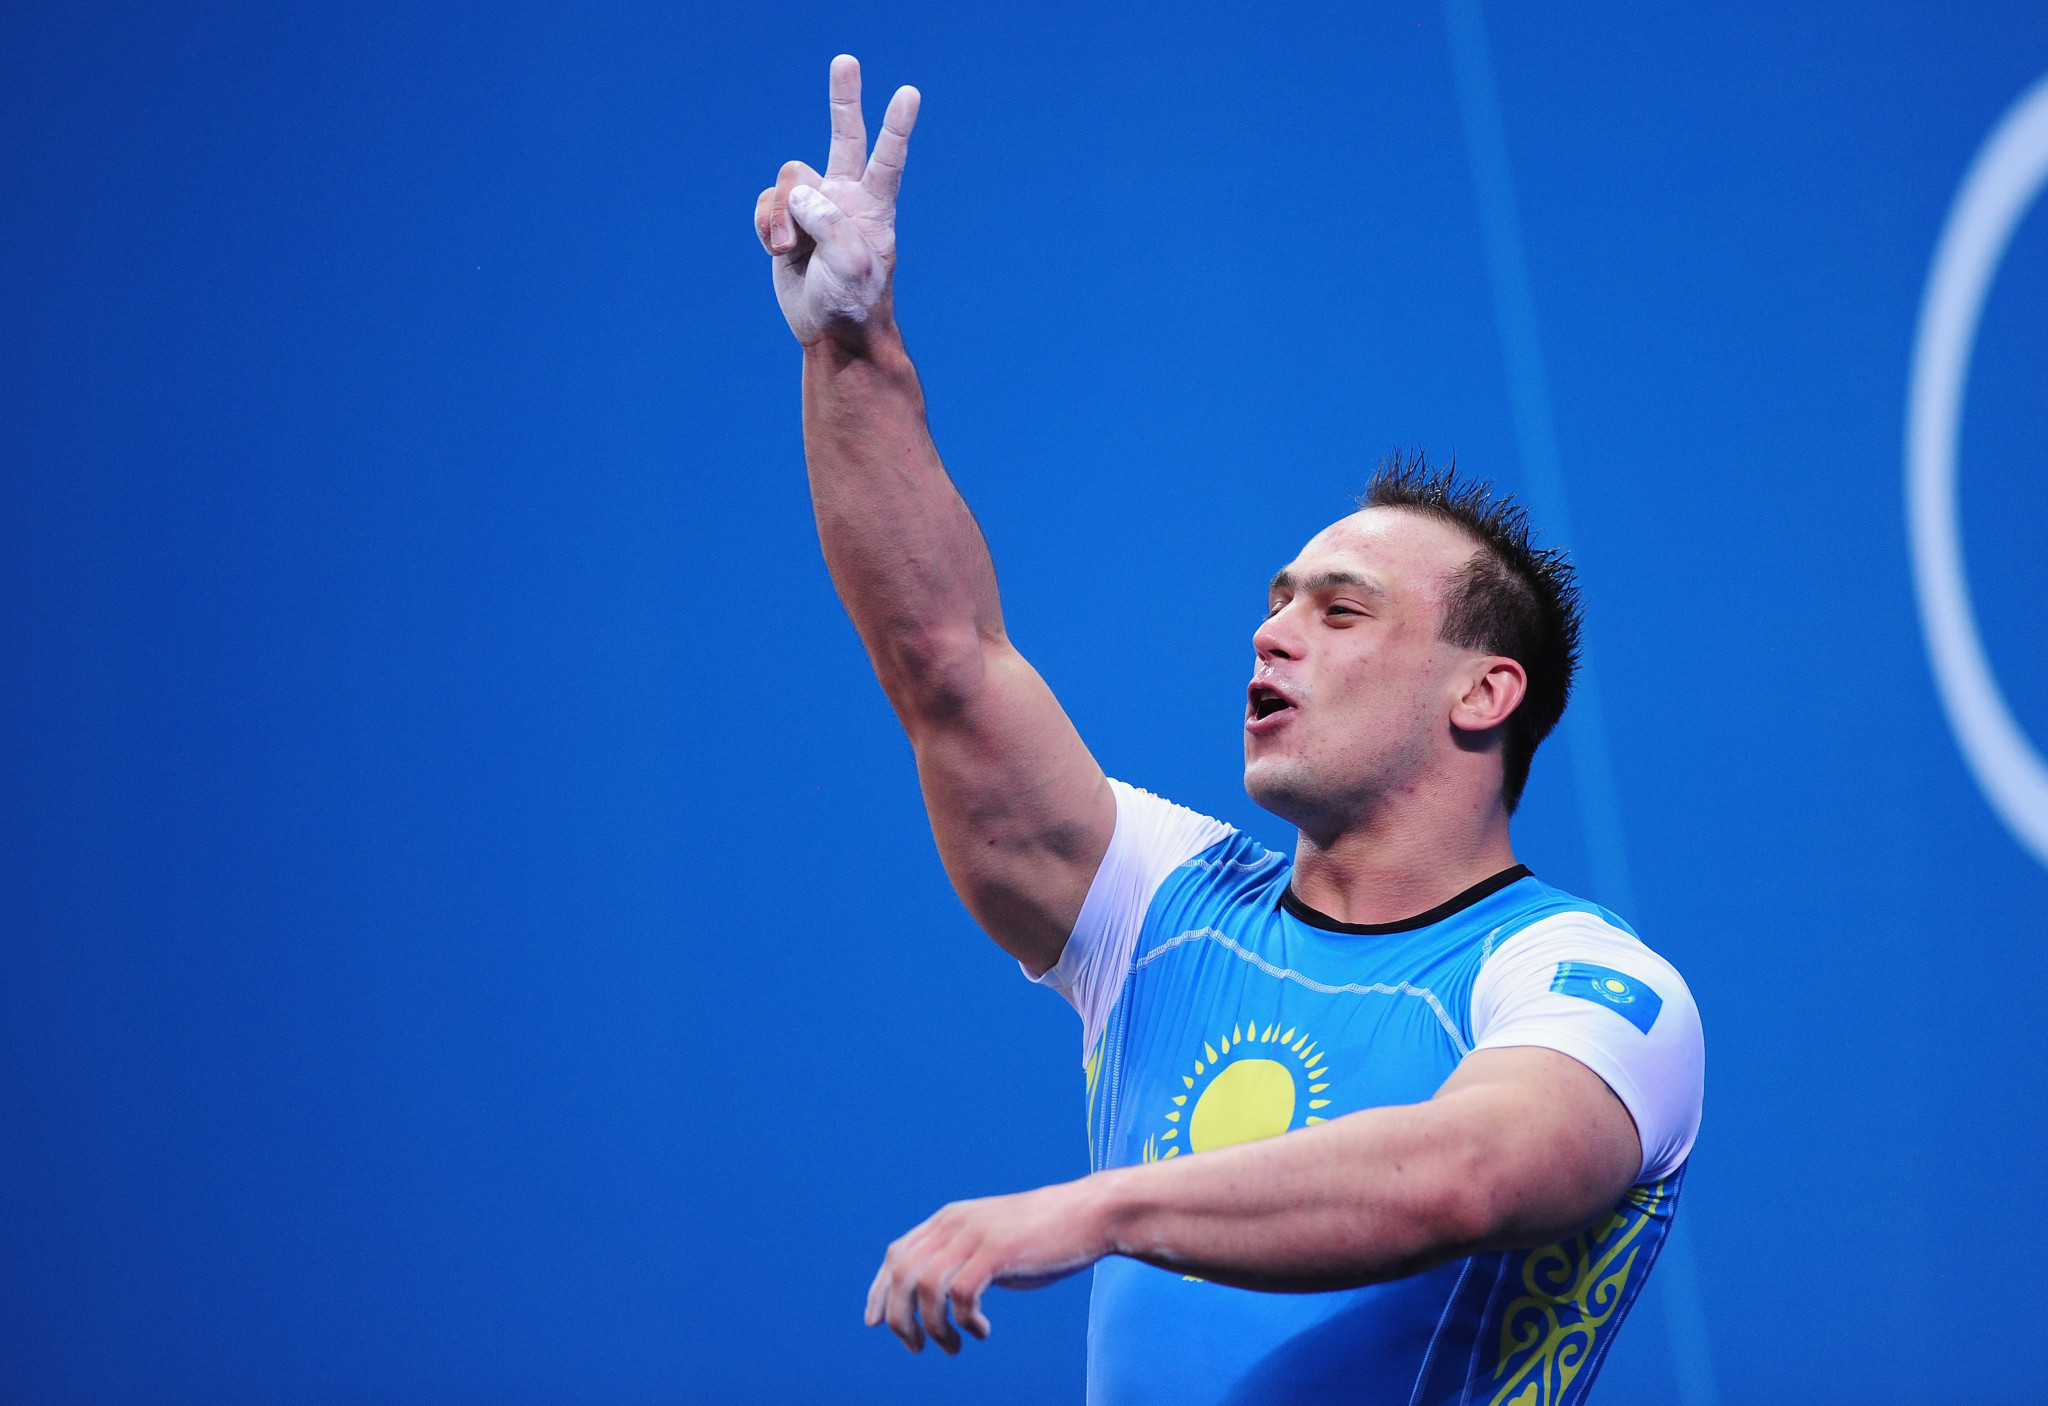 Ilya Ilyin celebrates winning a second Olympic title - but both gold medals have now been taken from him. However, he is still in line to compete at Tokyo 2020 ©Getty Images